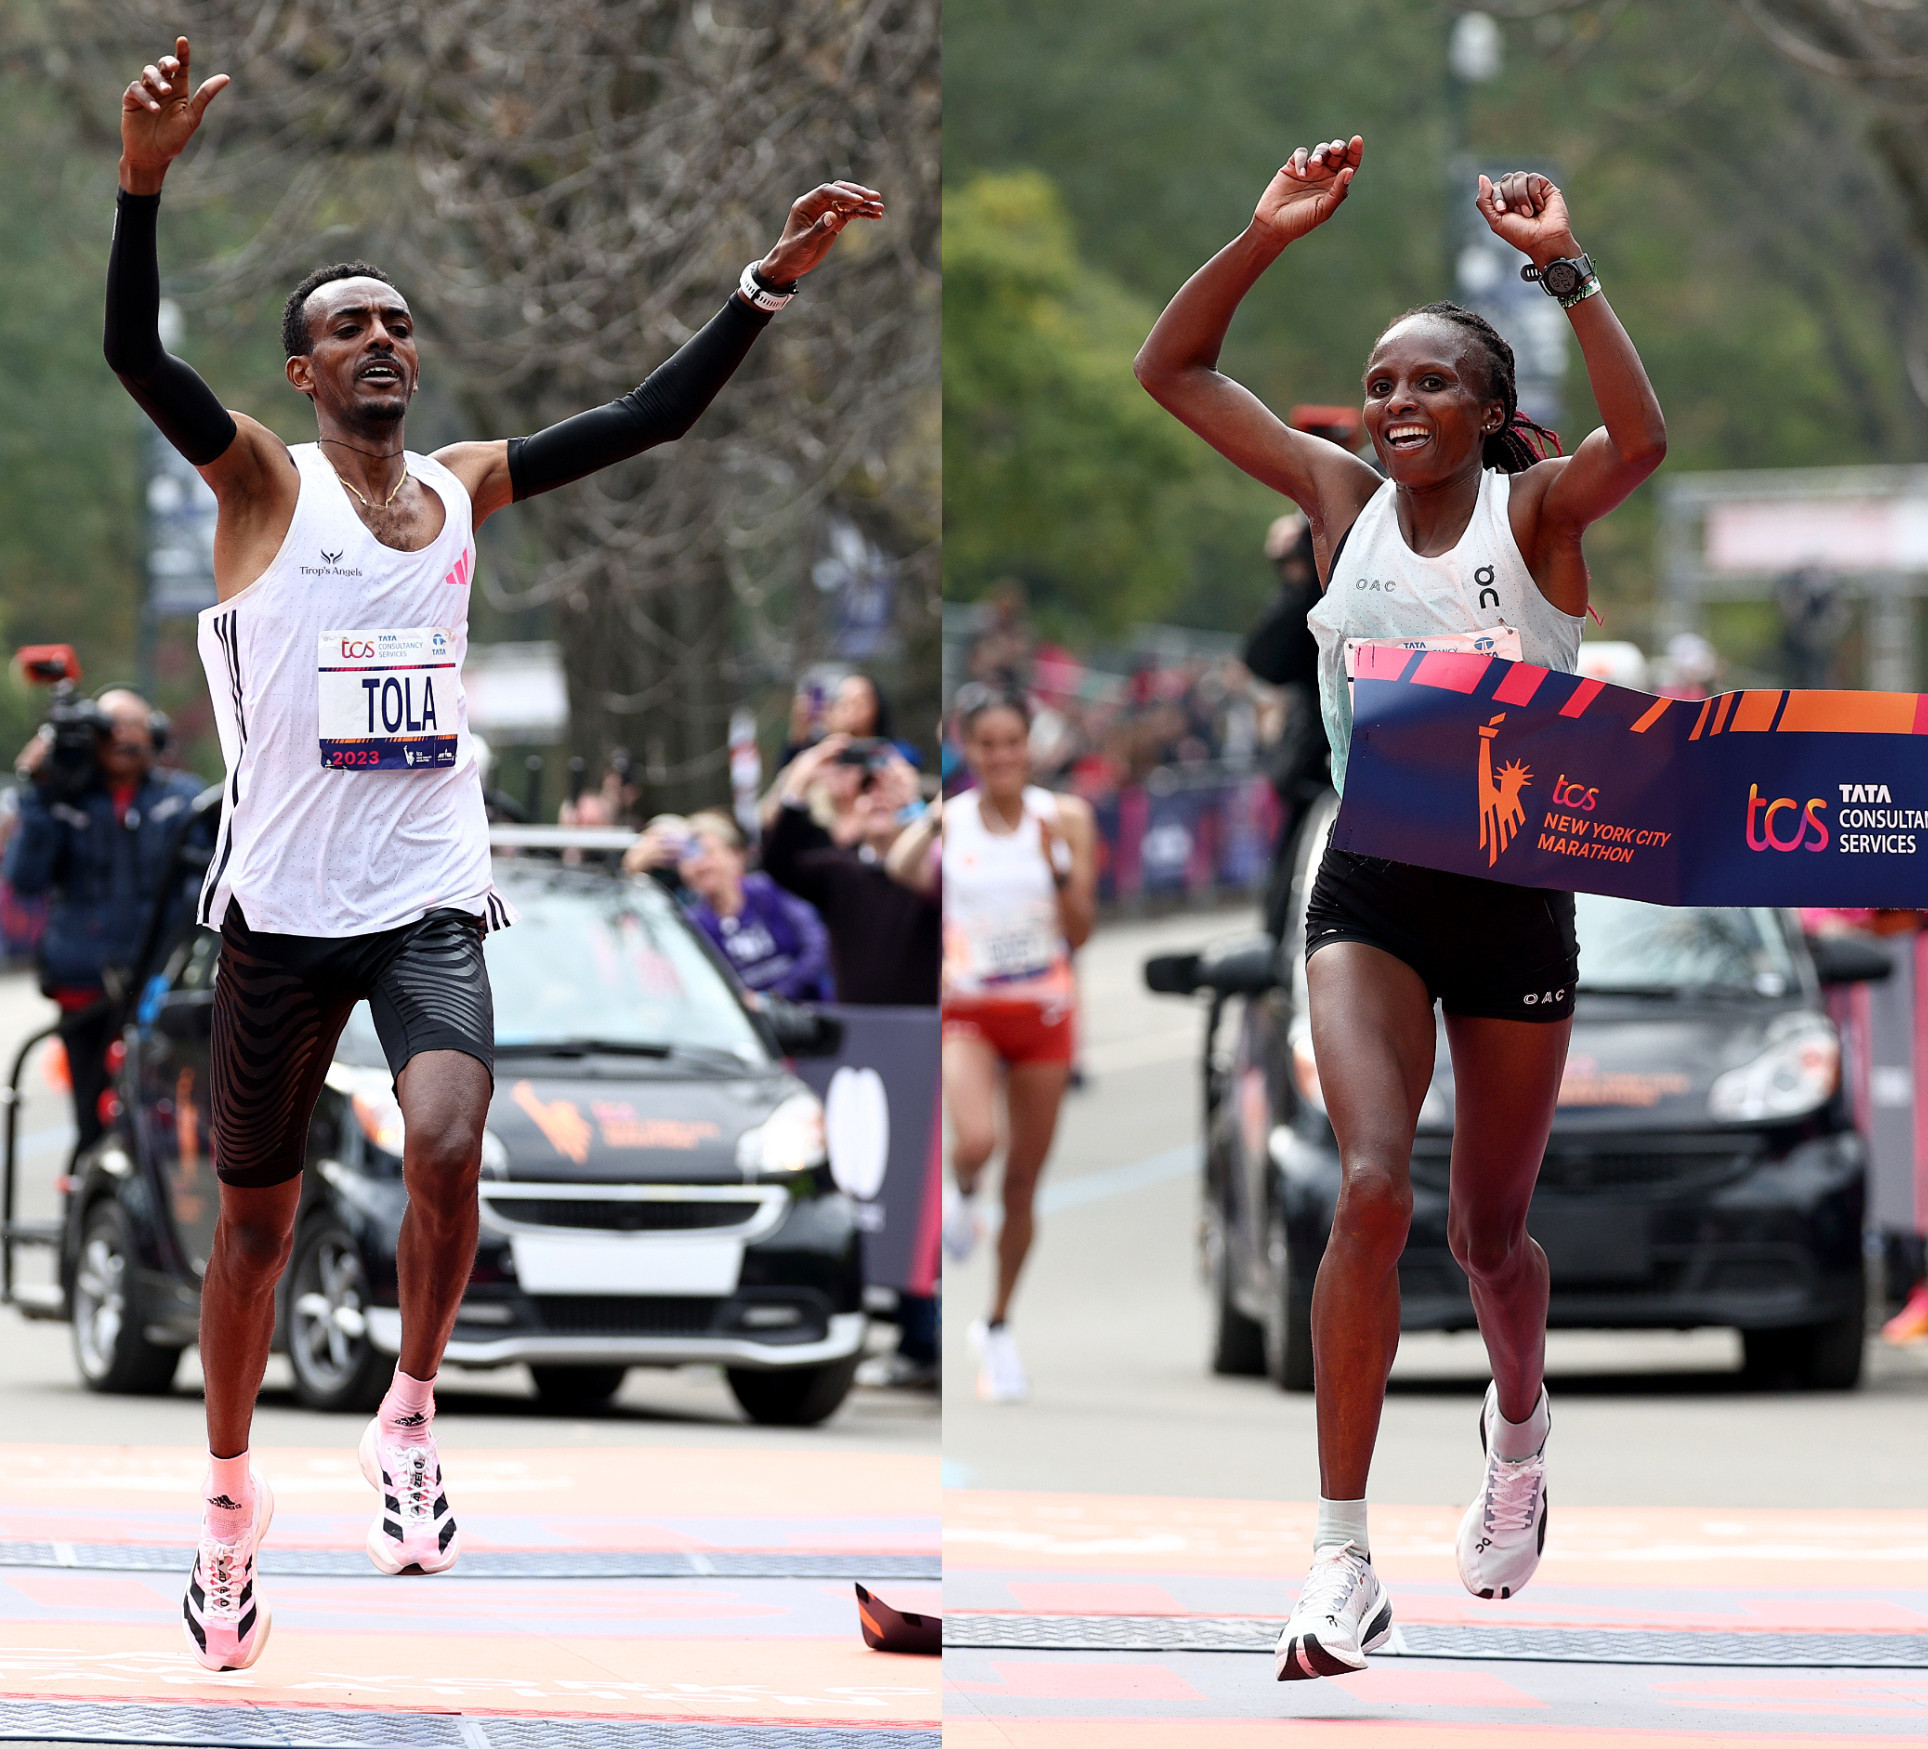 Tola and Obiri celebrate their victory just metres from the finish line. © Getty Images